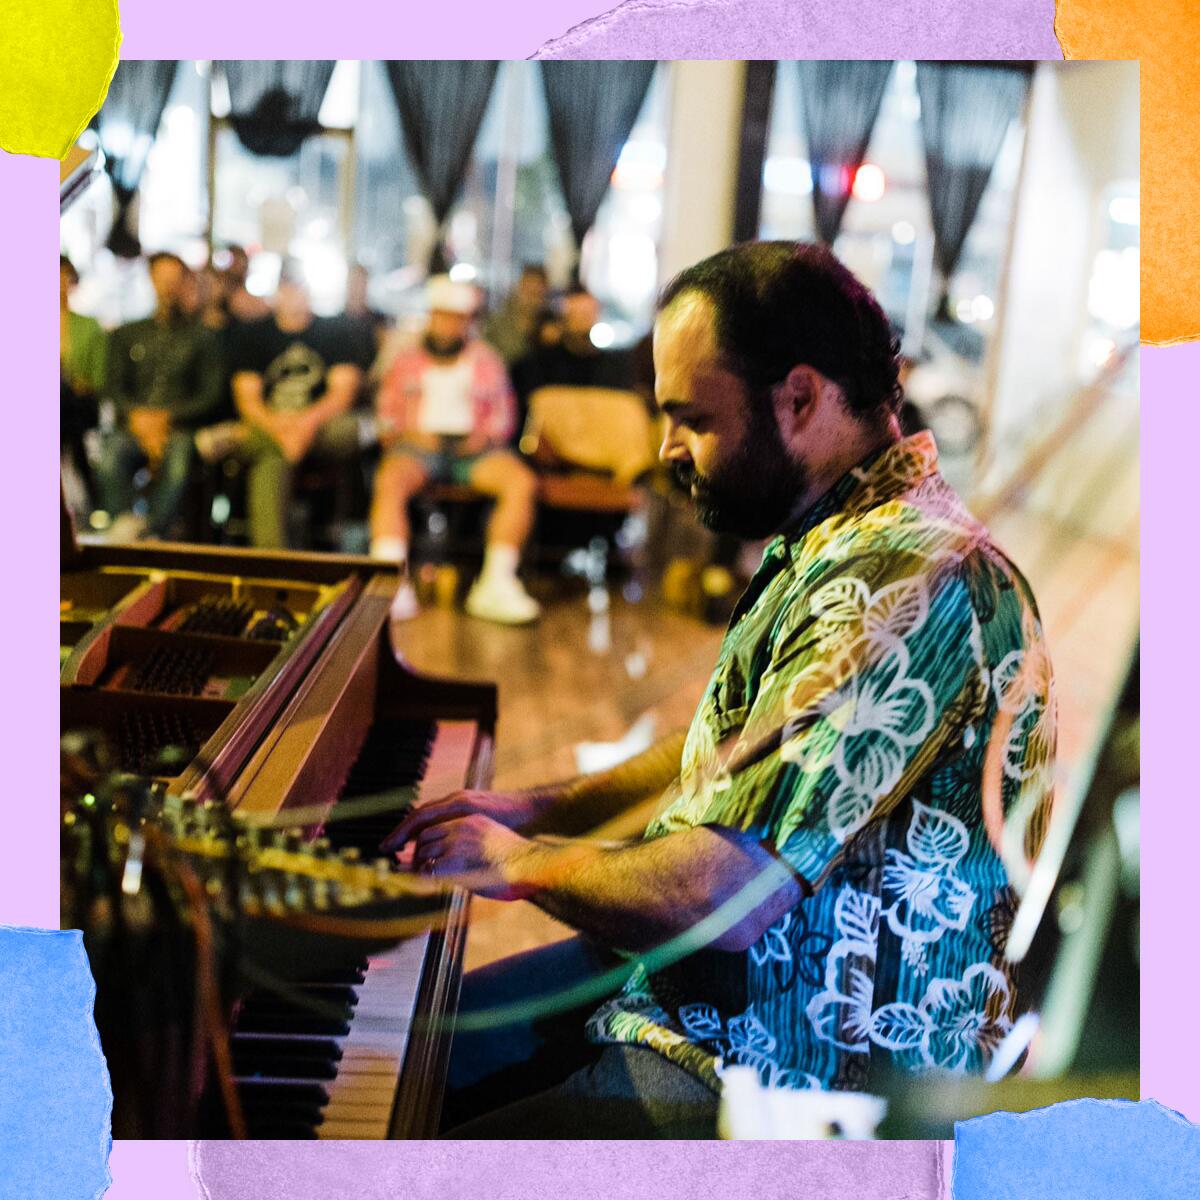 Close-up of a man in a Hawaiian shirt playing a grand piano. In the background, casually dressed people sit in chairs.